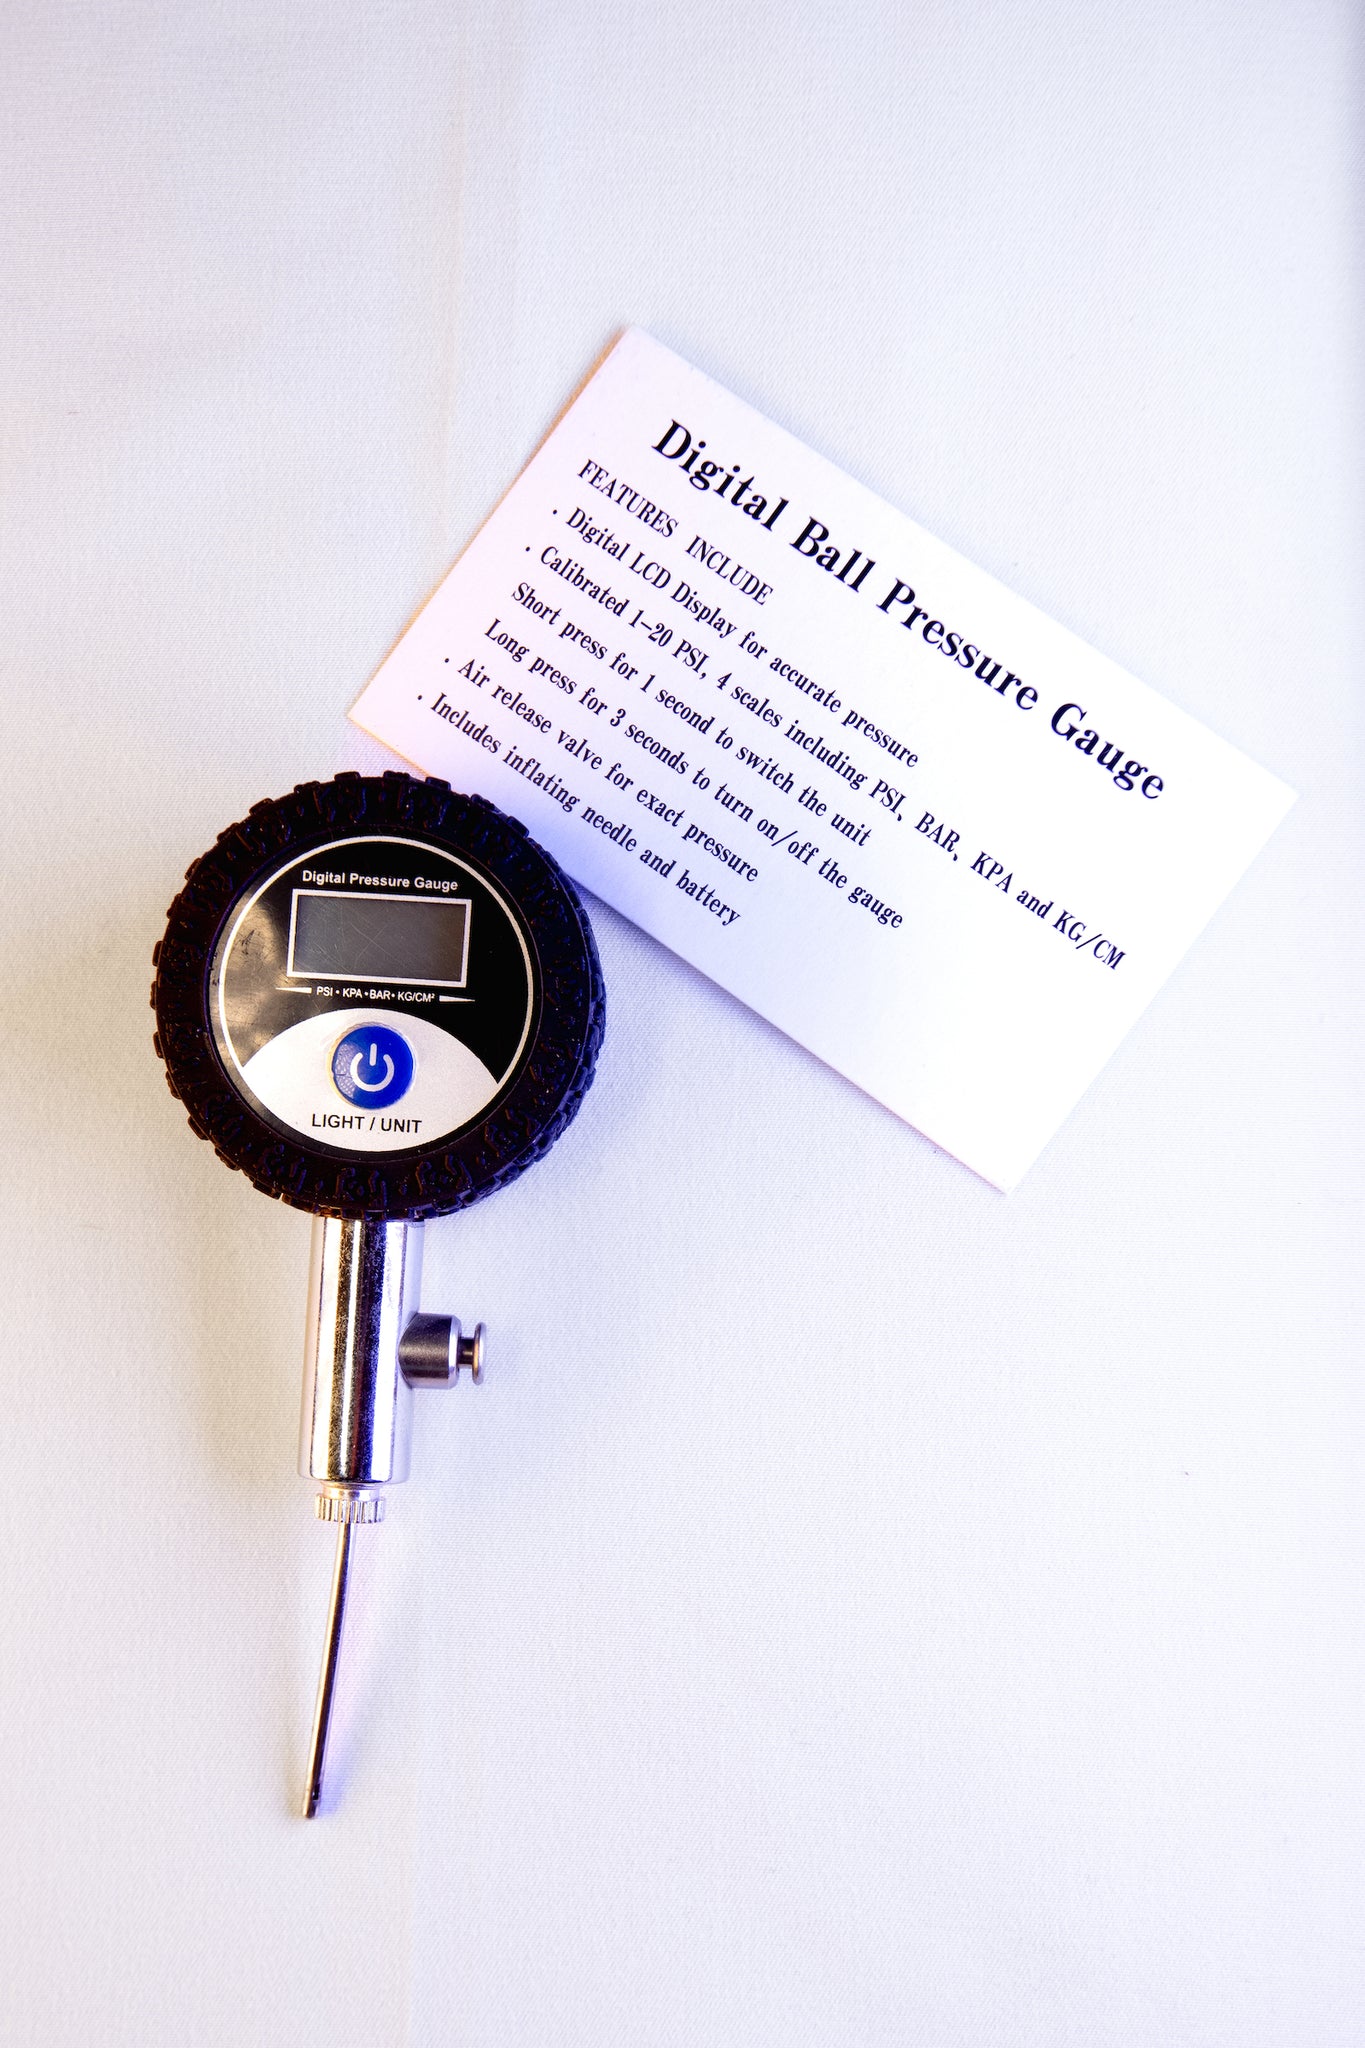 Digital Ball Pressure Gauge with card showing its features. 